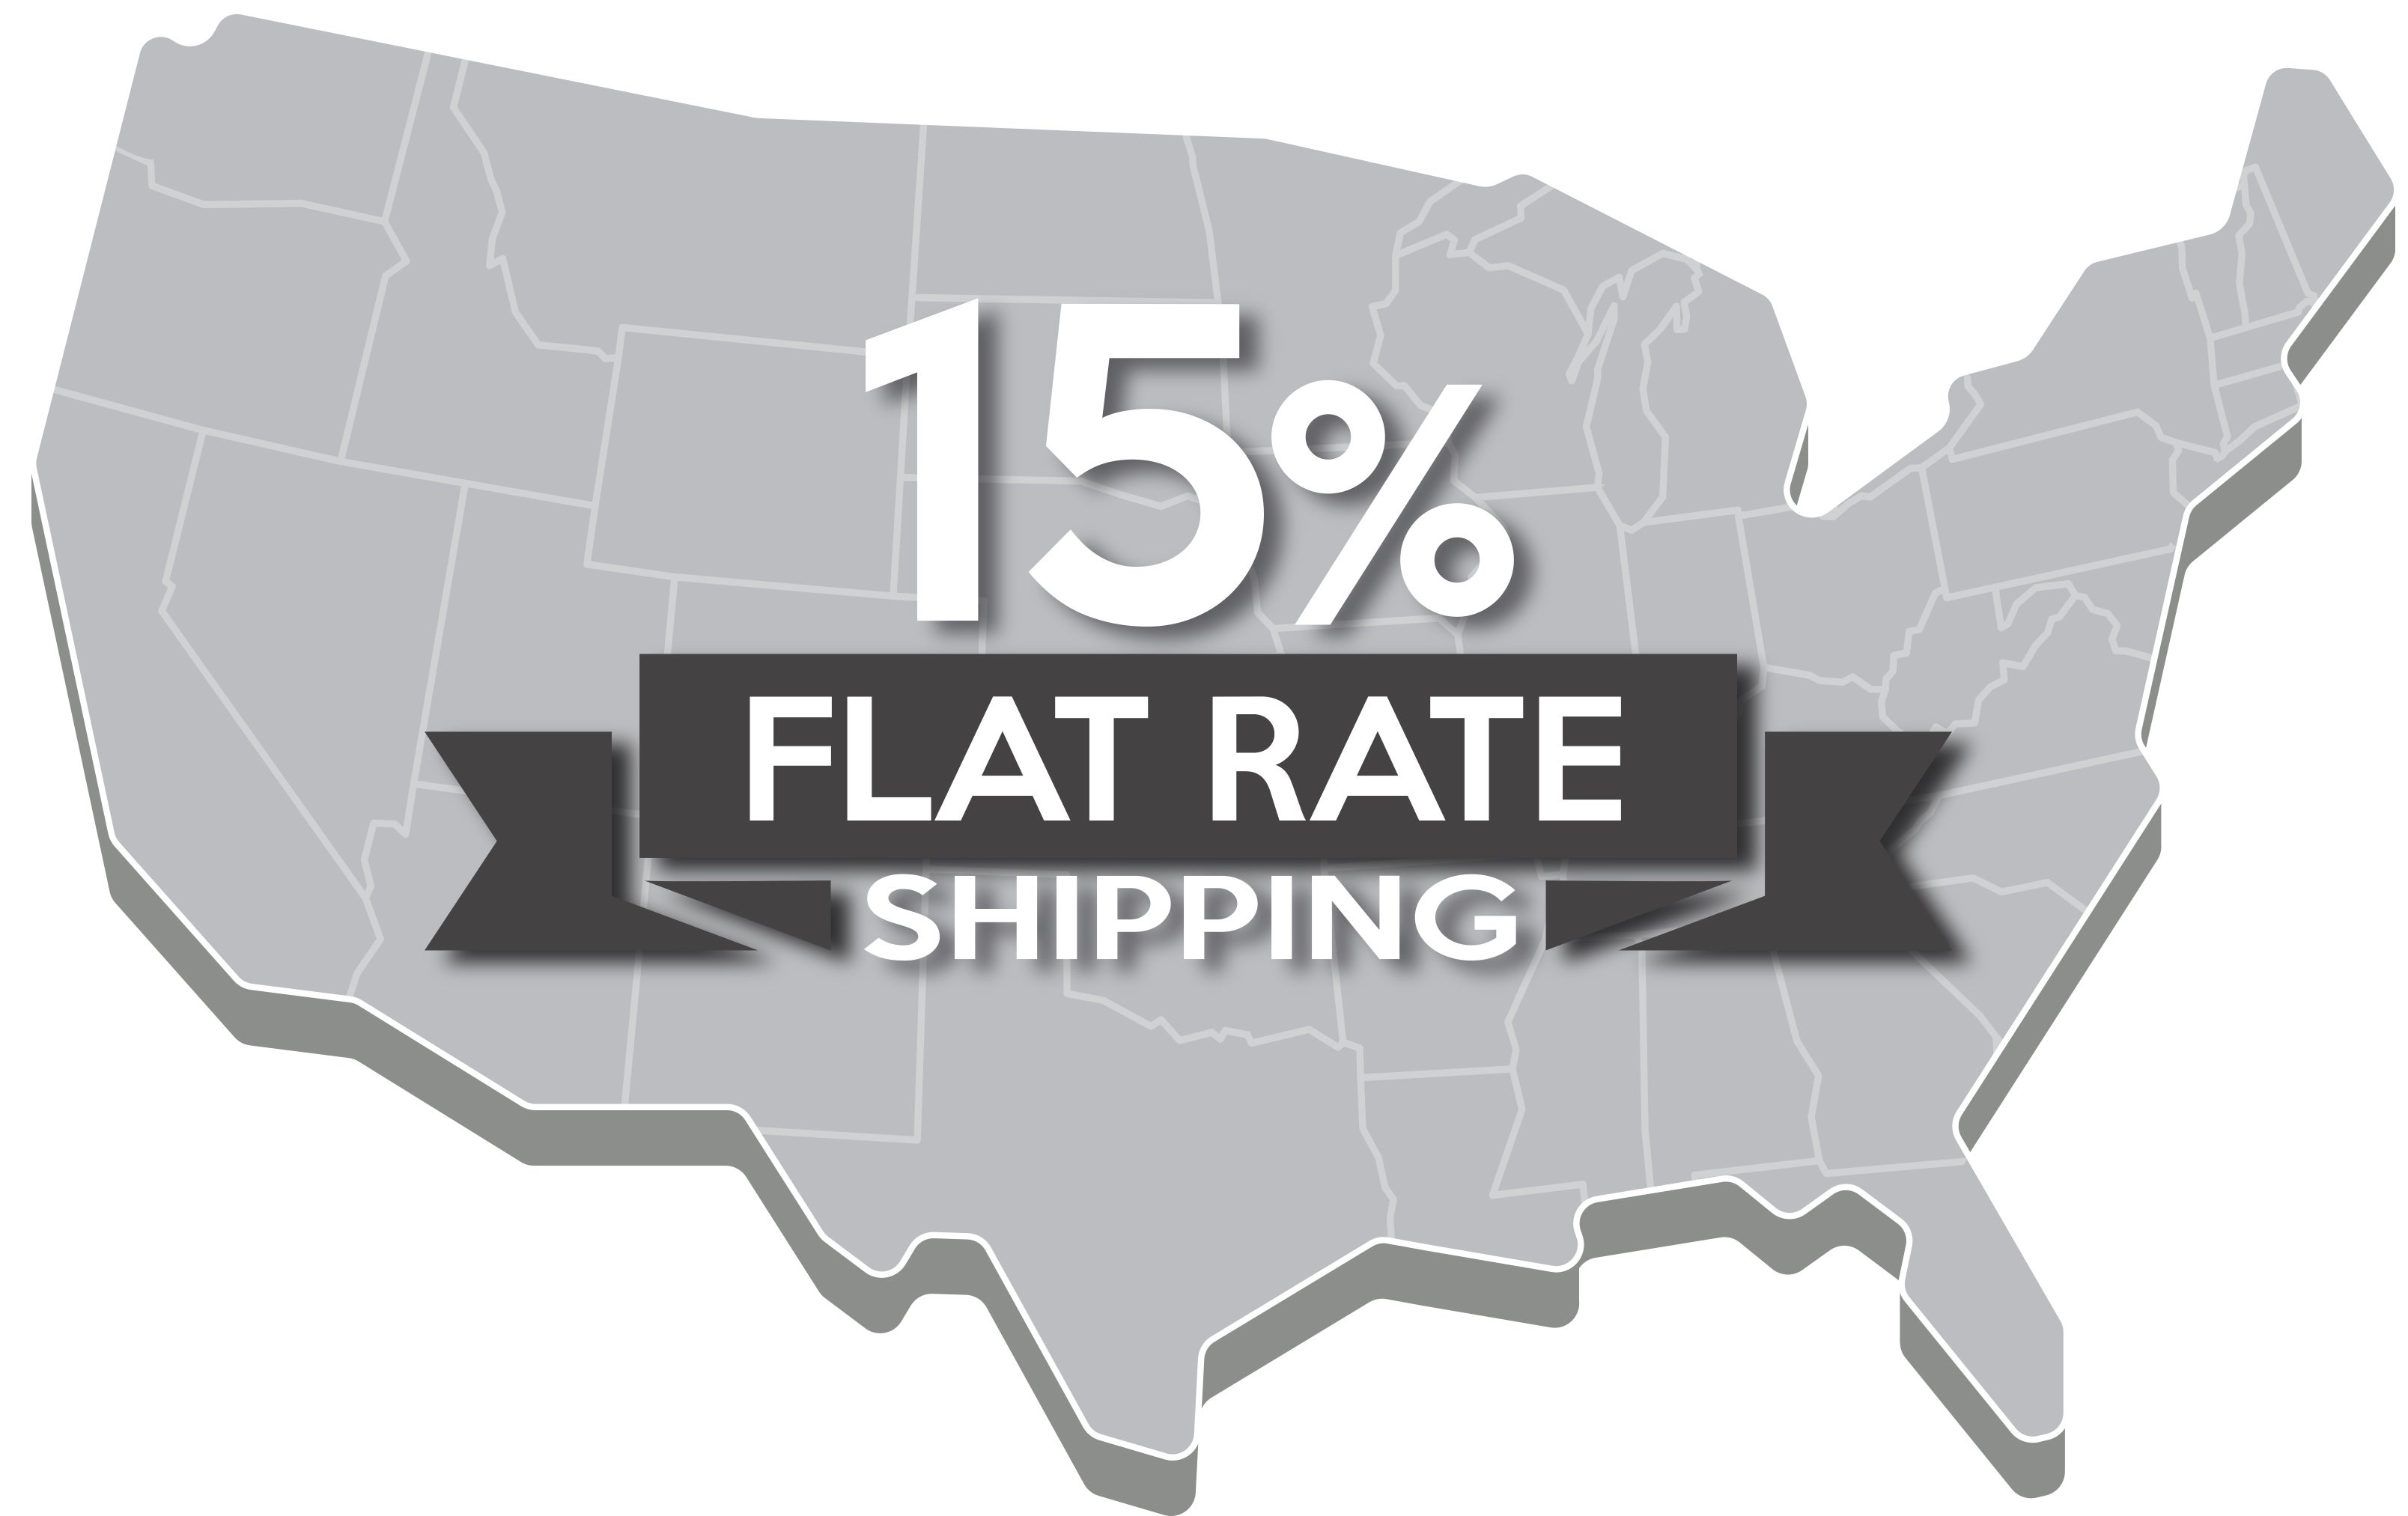 Flat Rate shipping